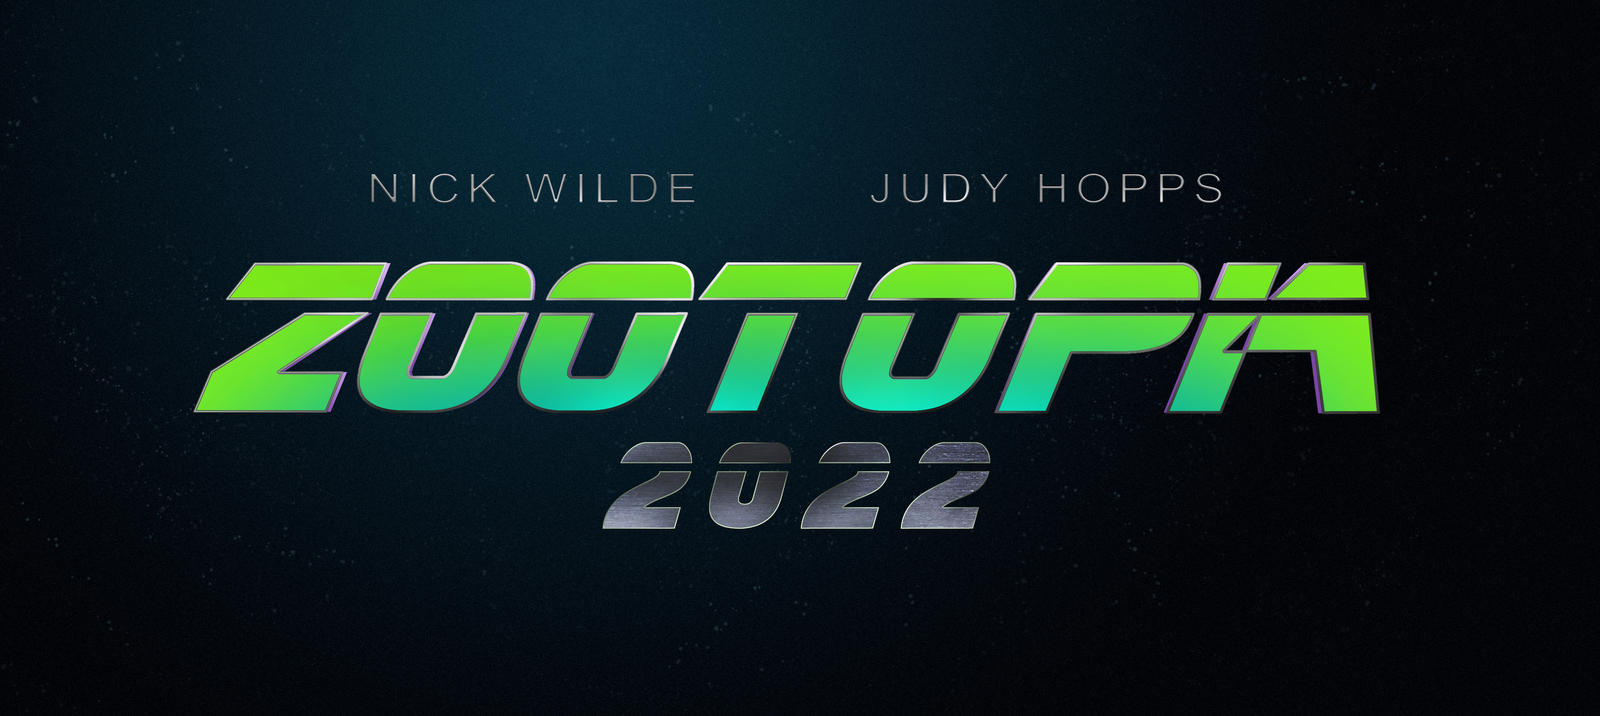 Zootopia 2022. I can't help but love you. - Zootopia, Blade runner, Blade Runner 2049, Art, Thewyvernsweaver, Judy hopps, Nick wilde, Crossover, Crossover